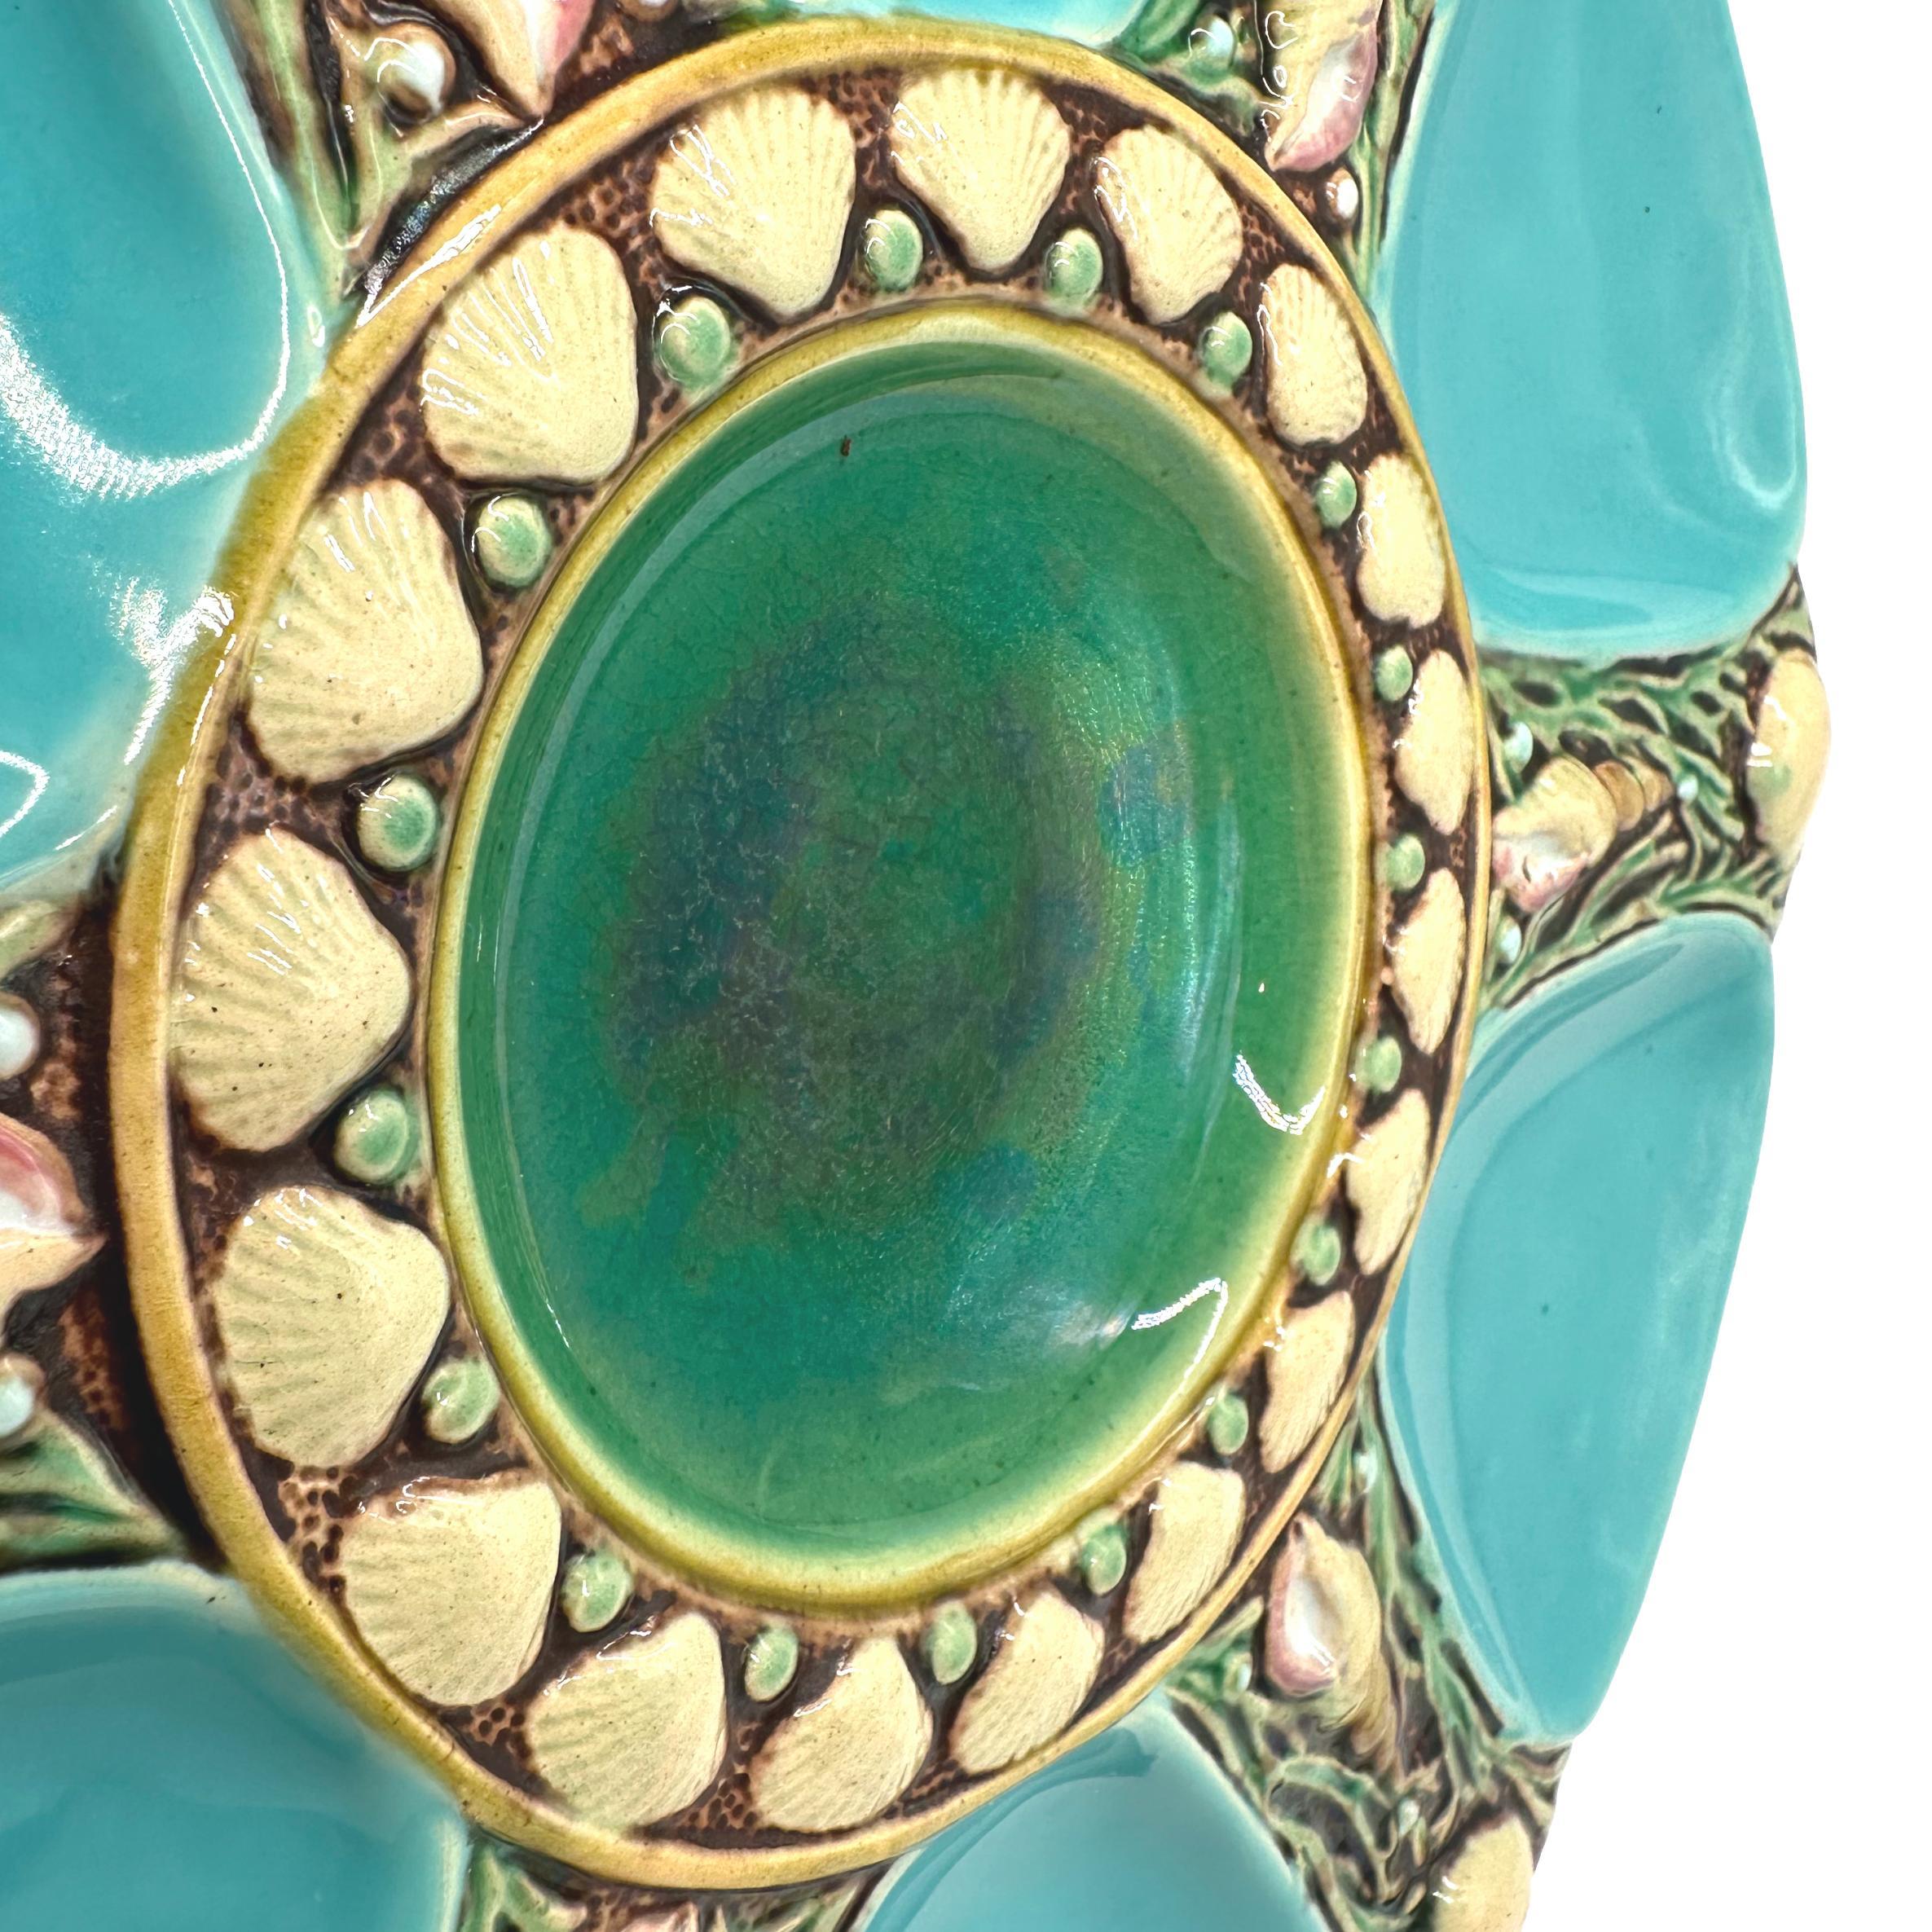 English Minton Majolica Turquoise-Ground Oyster Plate, Shells and Seaweed, Dated 1878